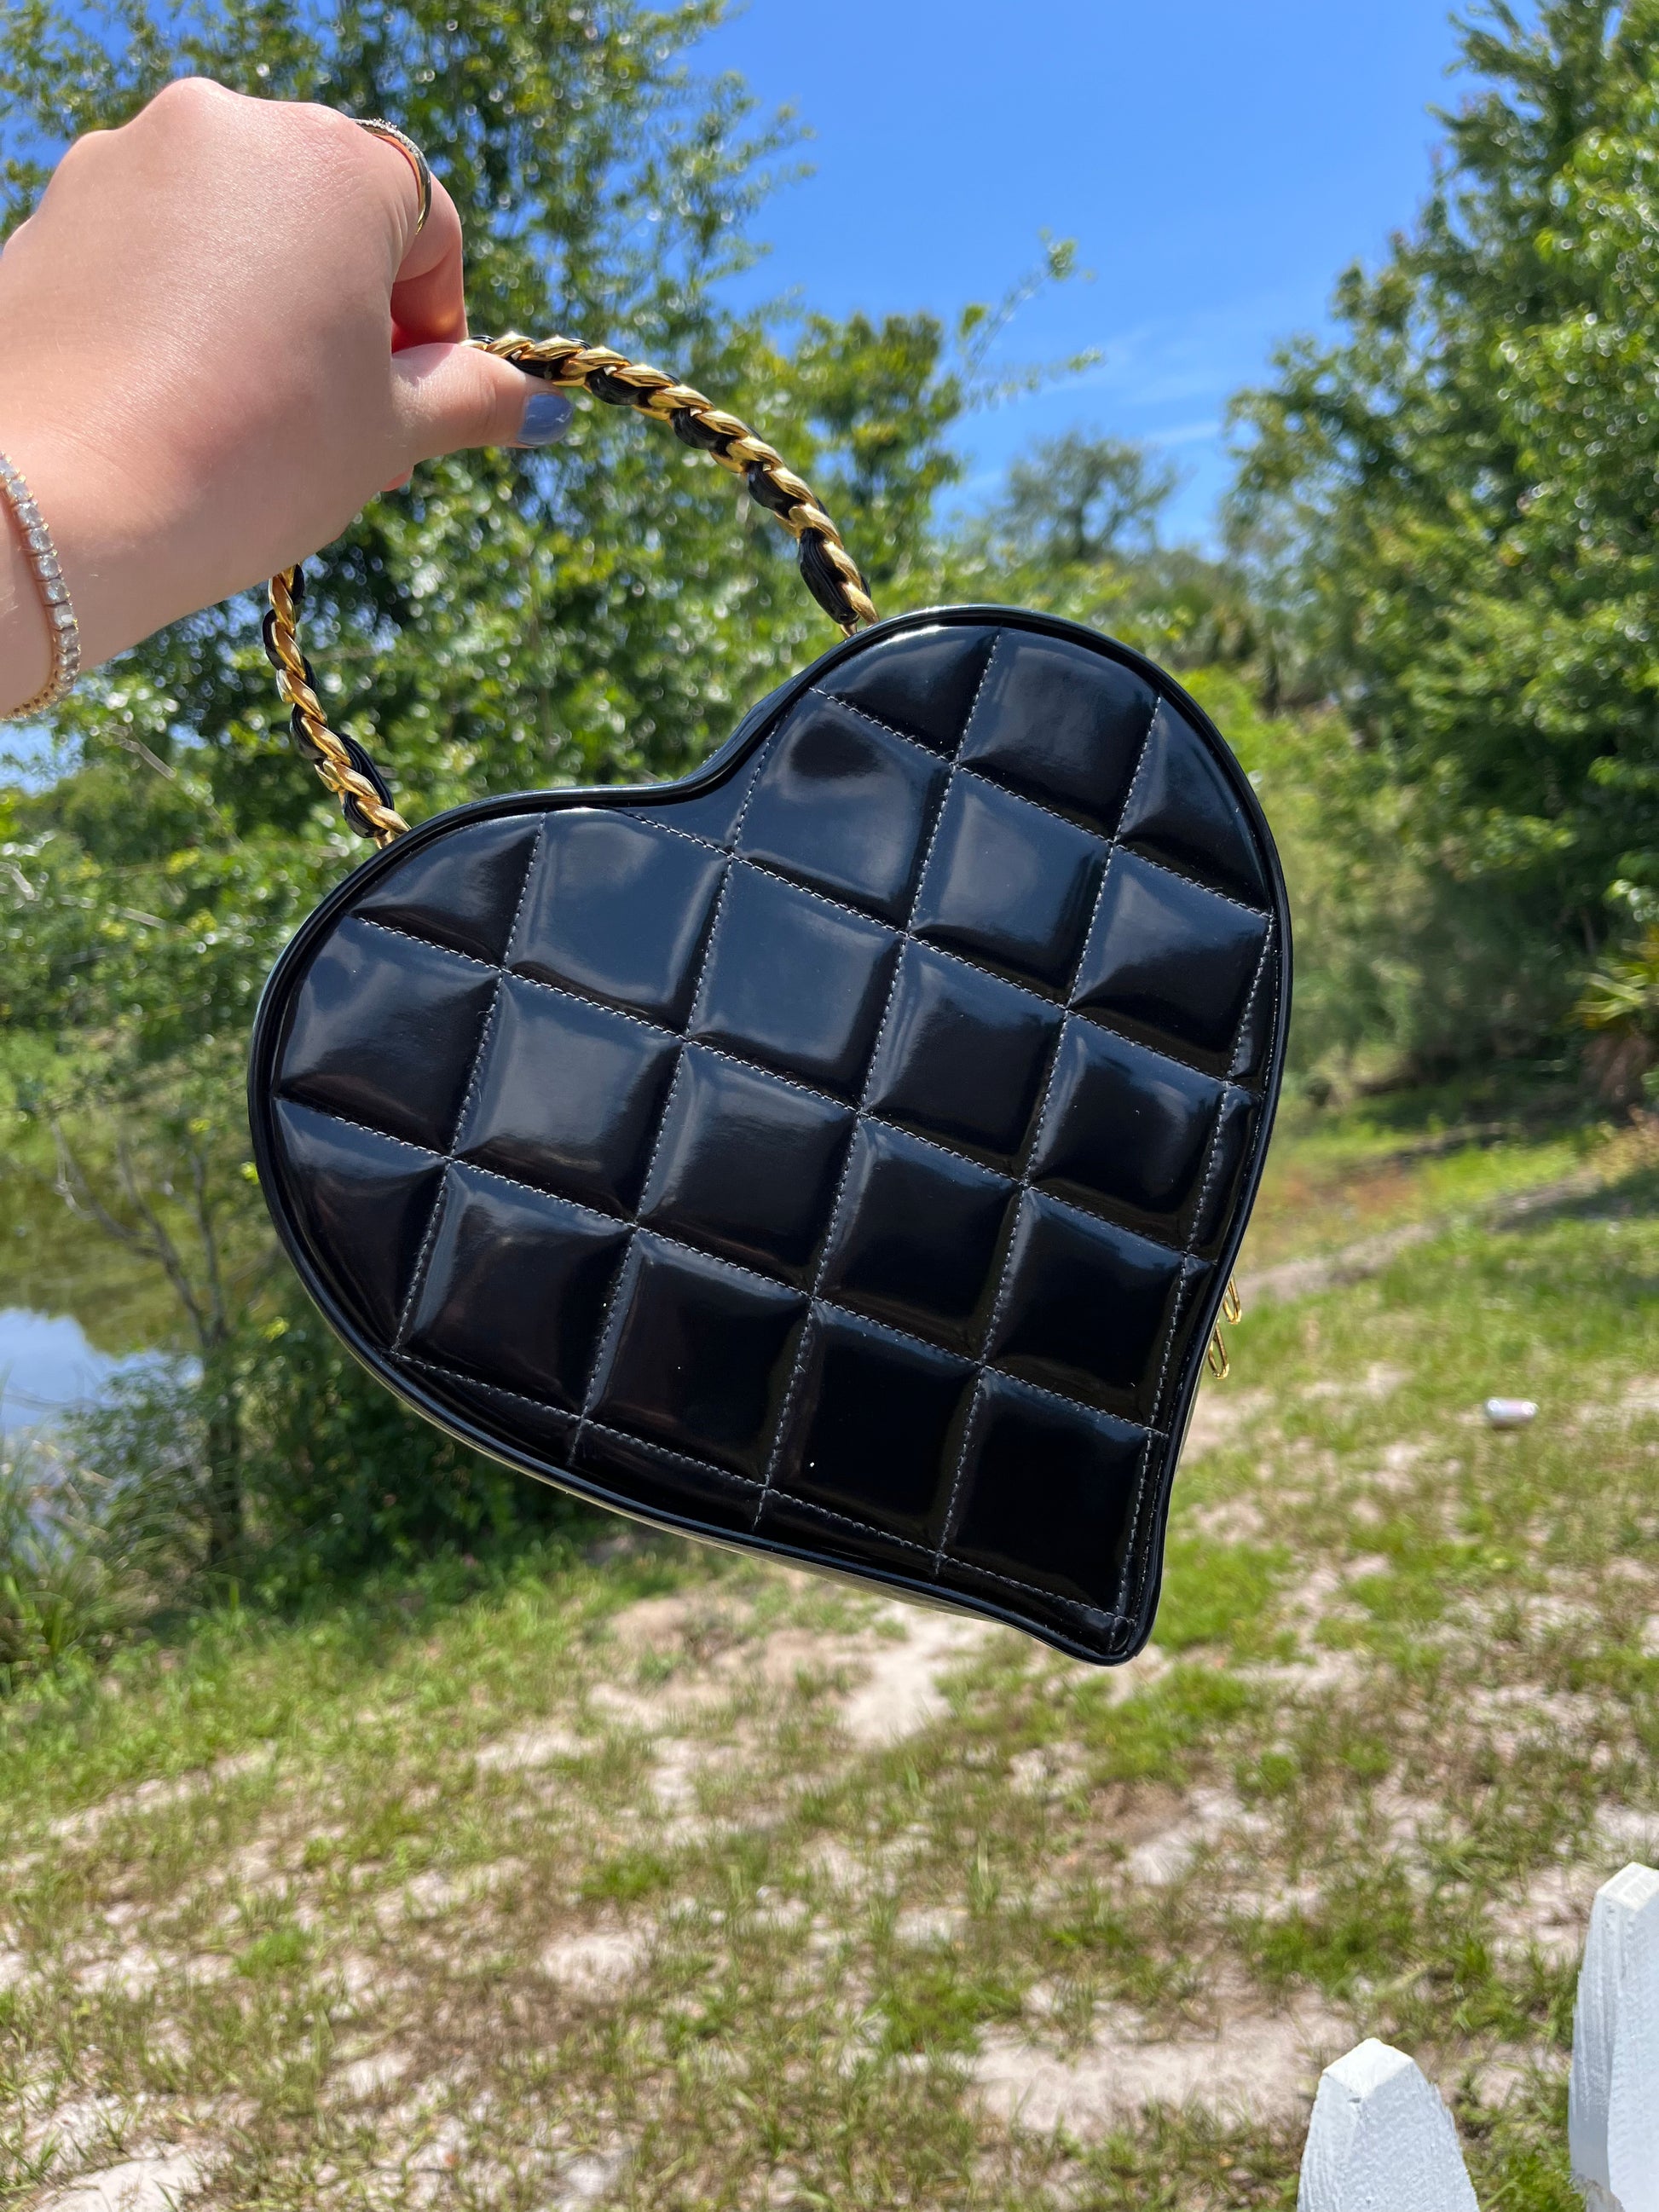 Chanel CC in Love Heart Clutch with Chain Quilted Lambskin - ShopStyle